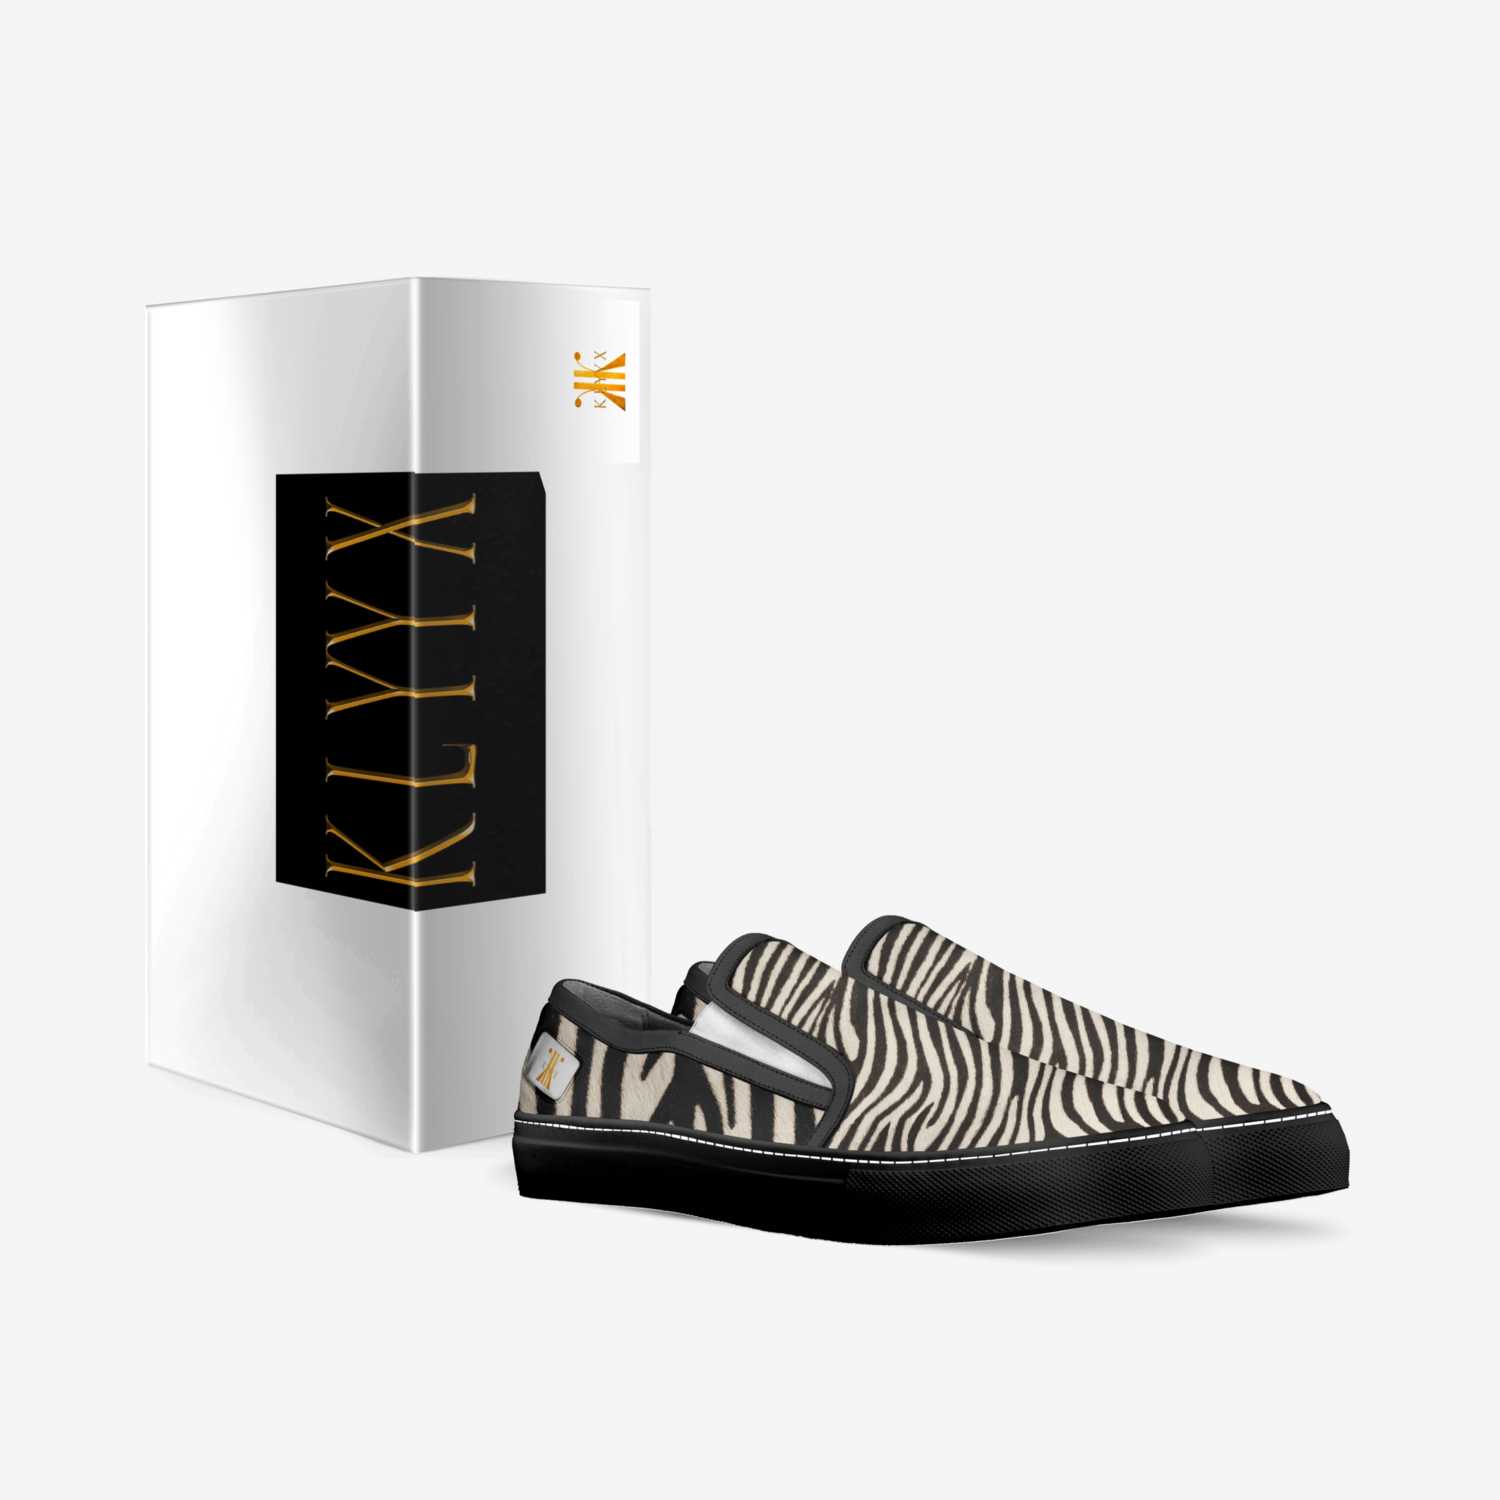 KLYYX 2 custom made in Italy shoes by Wendell Hawkins | Box view